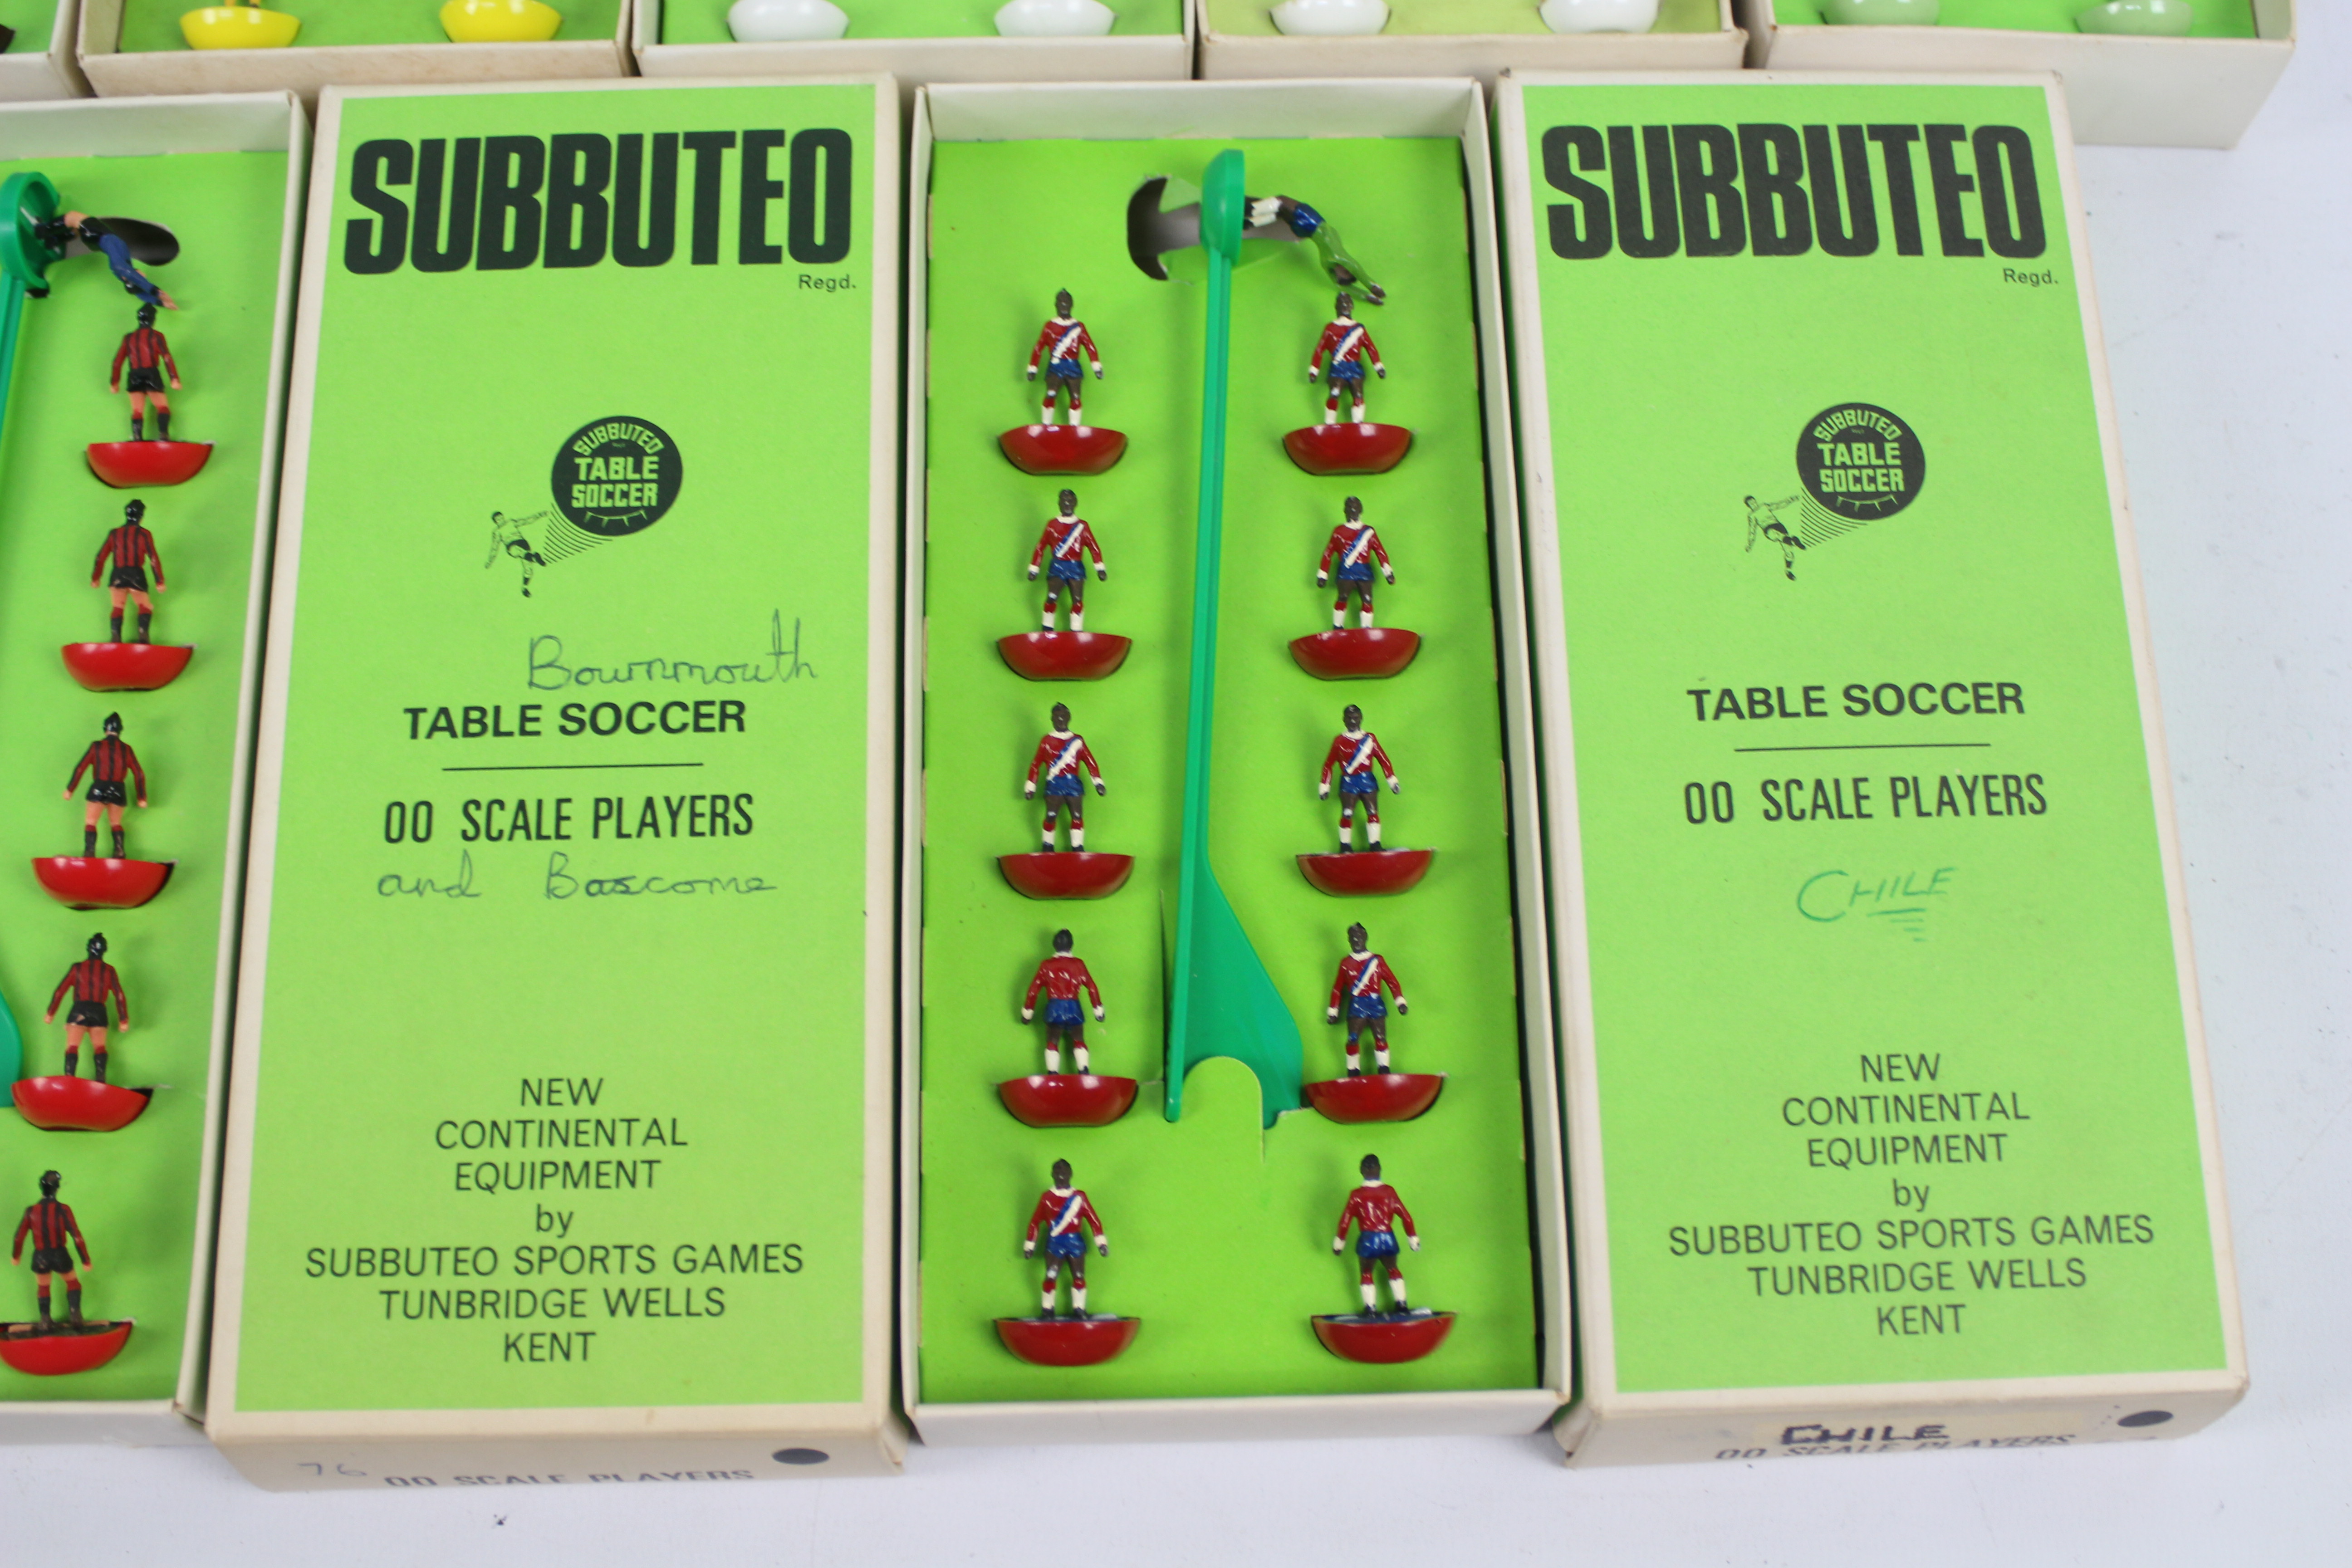 Subbuteo - Table Soccer - 00 Scale Players. - Image 5 of 5